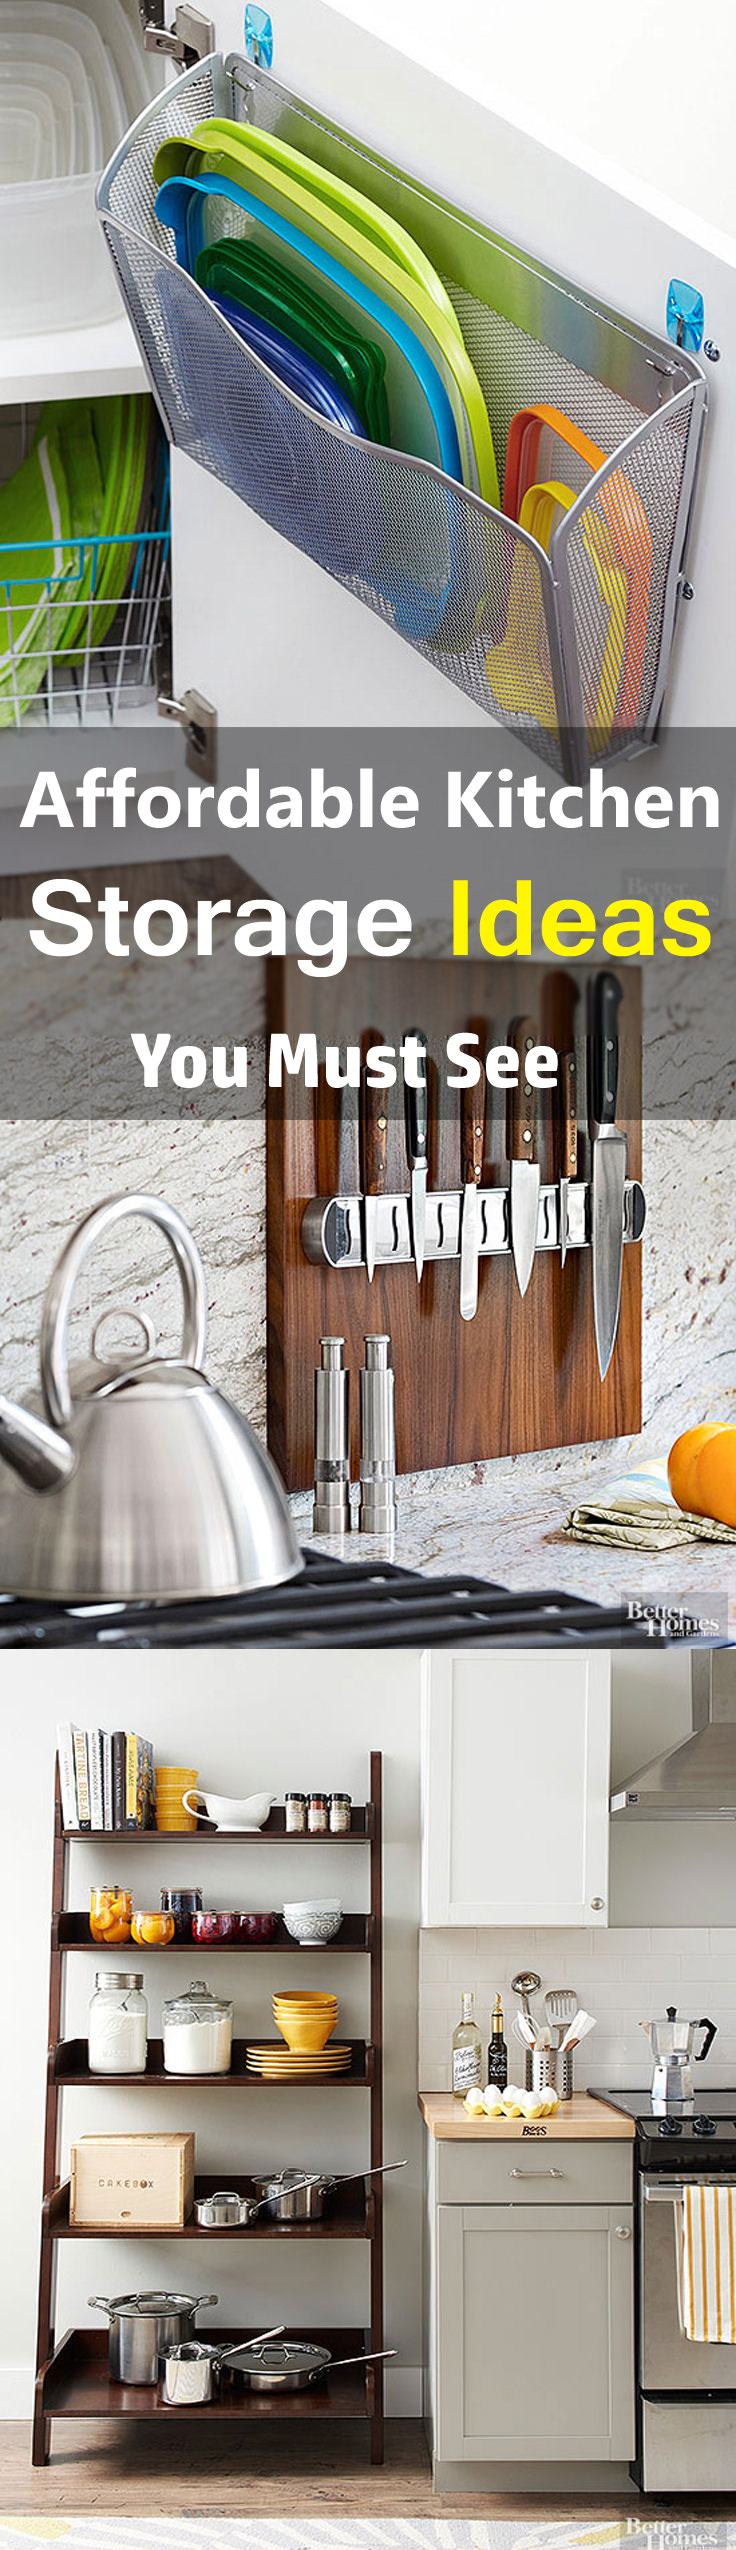 You don't need to splurge a lot of money to have an aptly organized kitchen. With these affordable kitchen storage ideas, you can create a lot of storage.